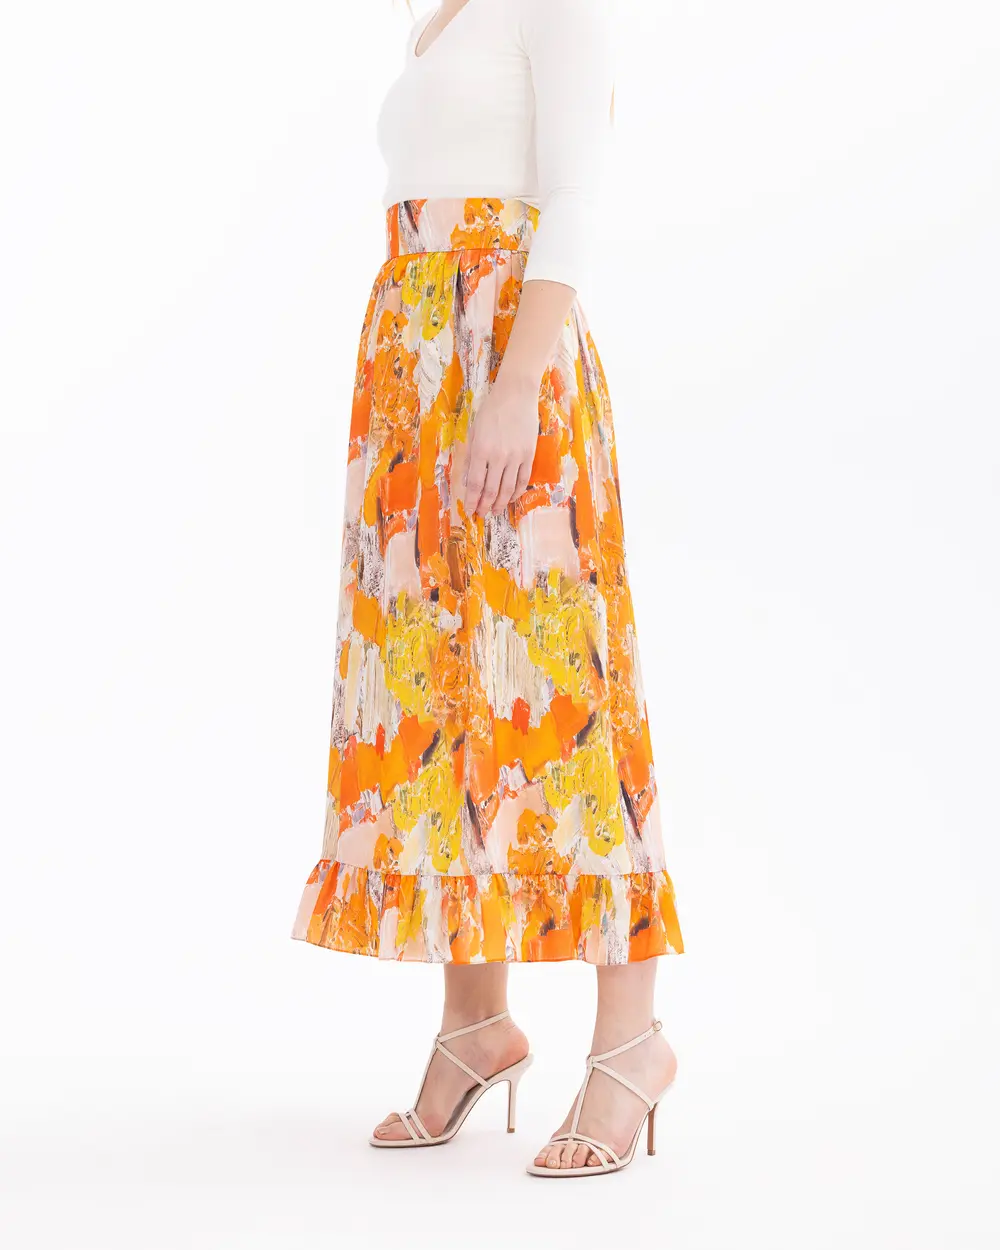 Maxi Length Skirt with Color Transition